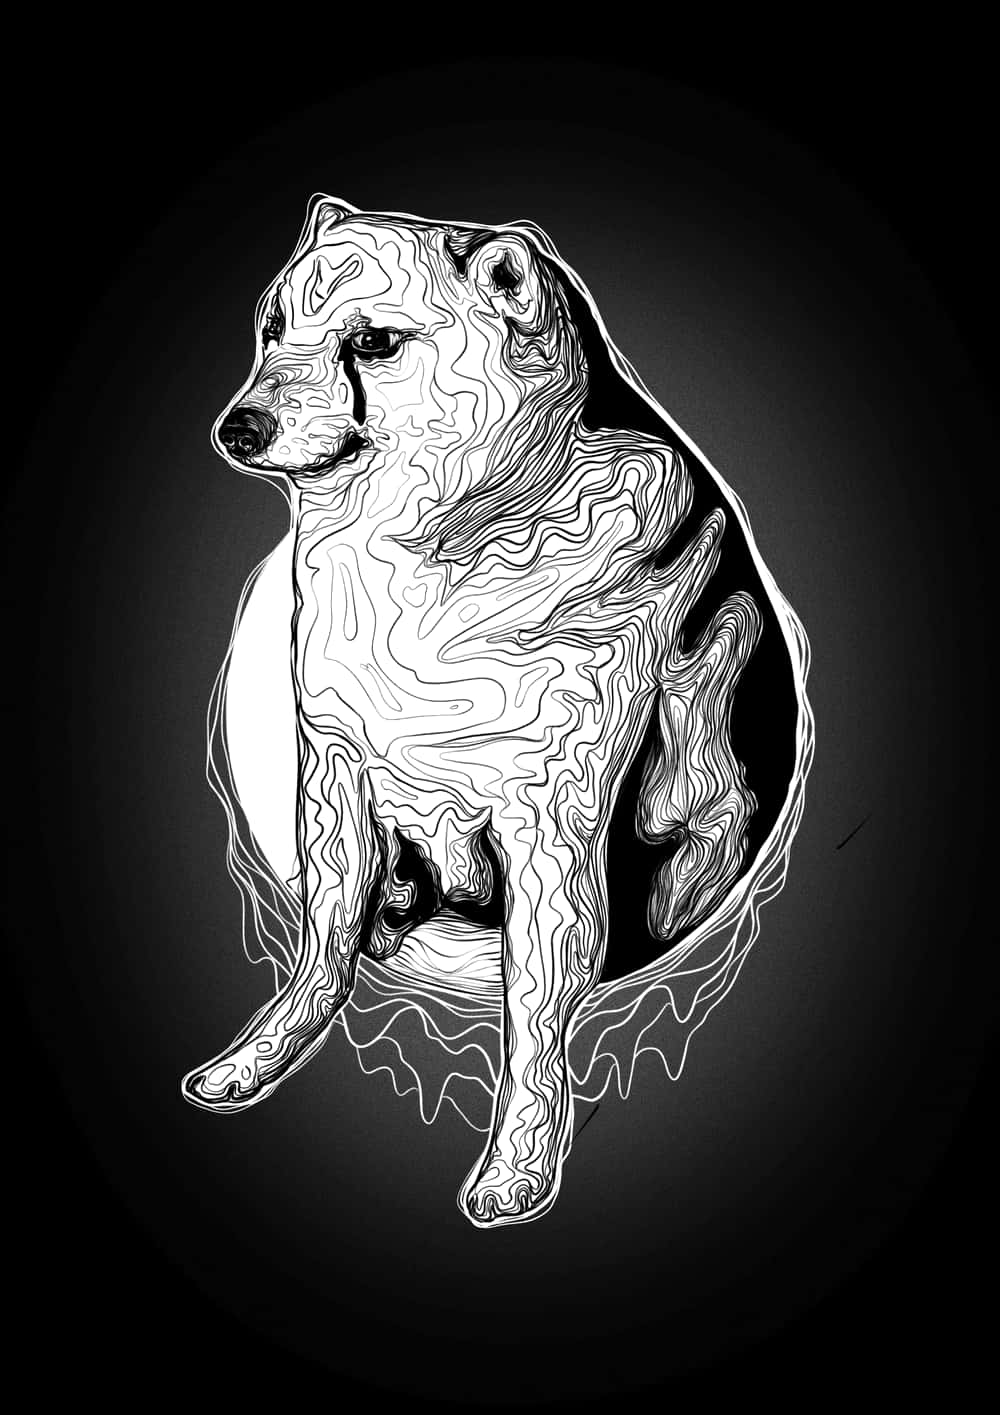 A Black And White Drawing Of A Dog Sitting On A Black Background Wallpaper